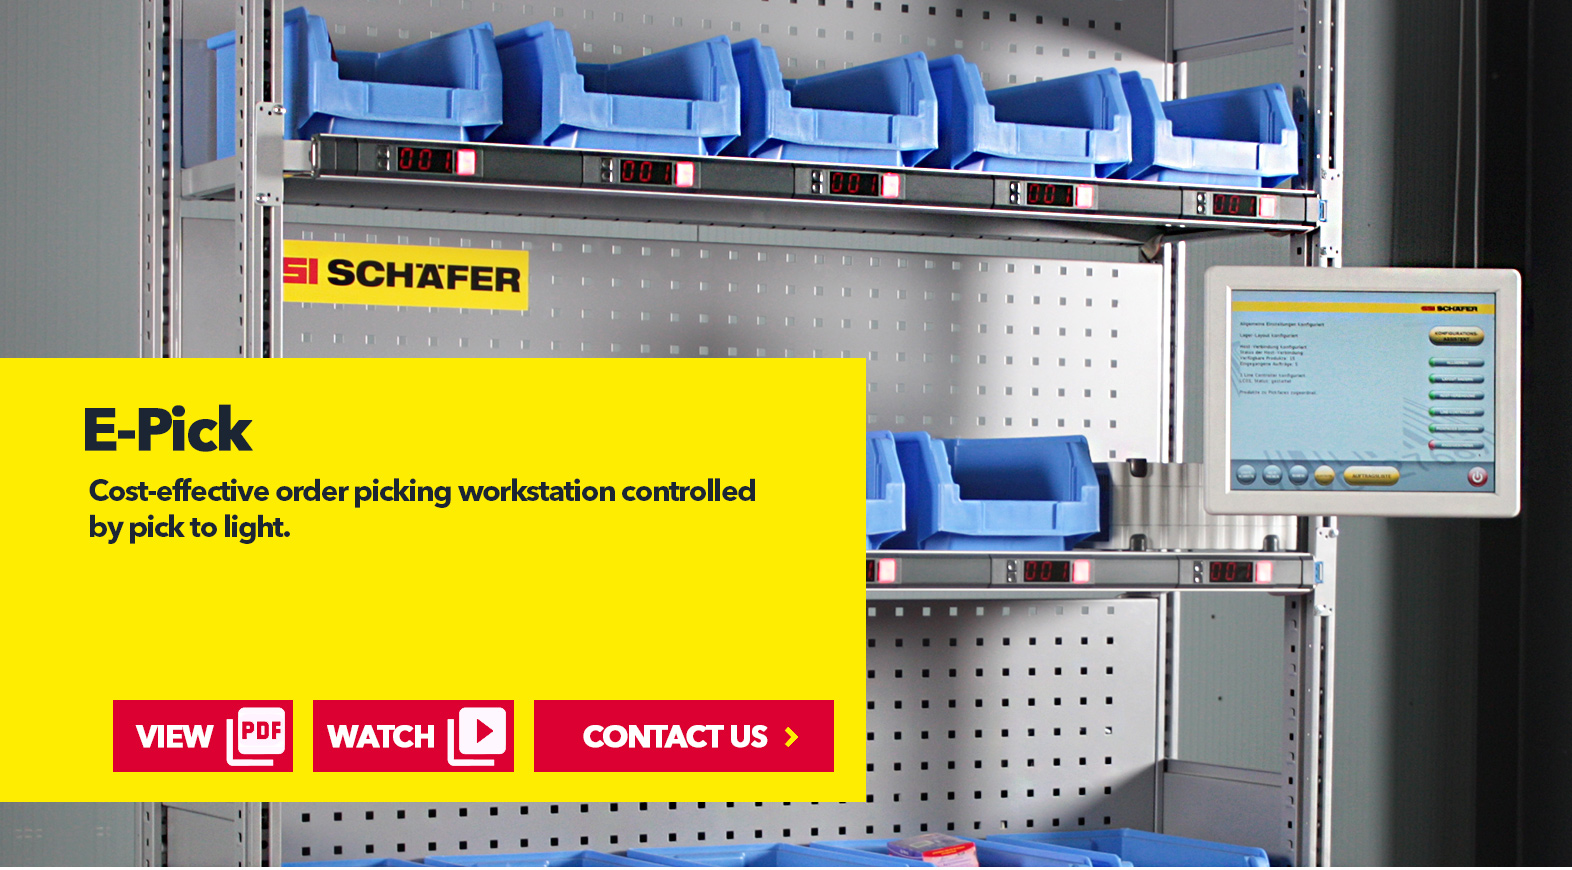 Picking ePick by SSI Schaefer USA Download Guide, Watch Video, Contact Us. www.chaefershelving.com